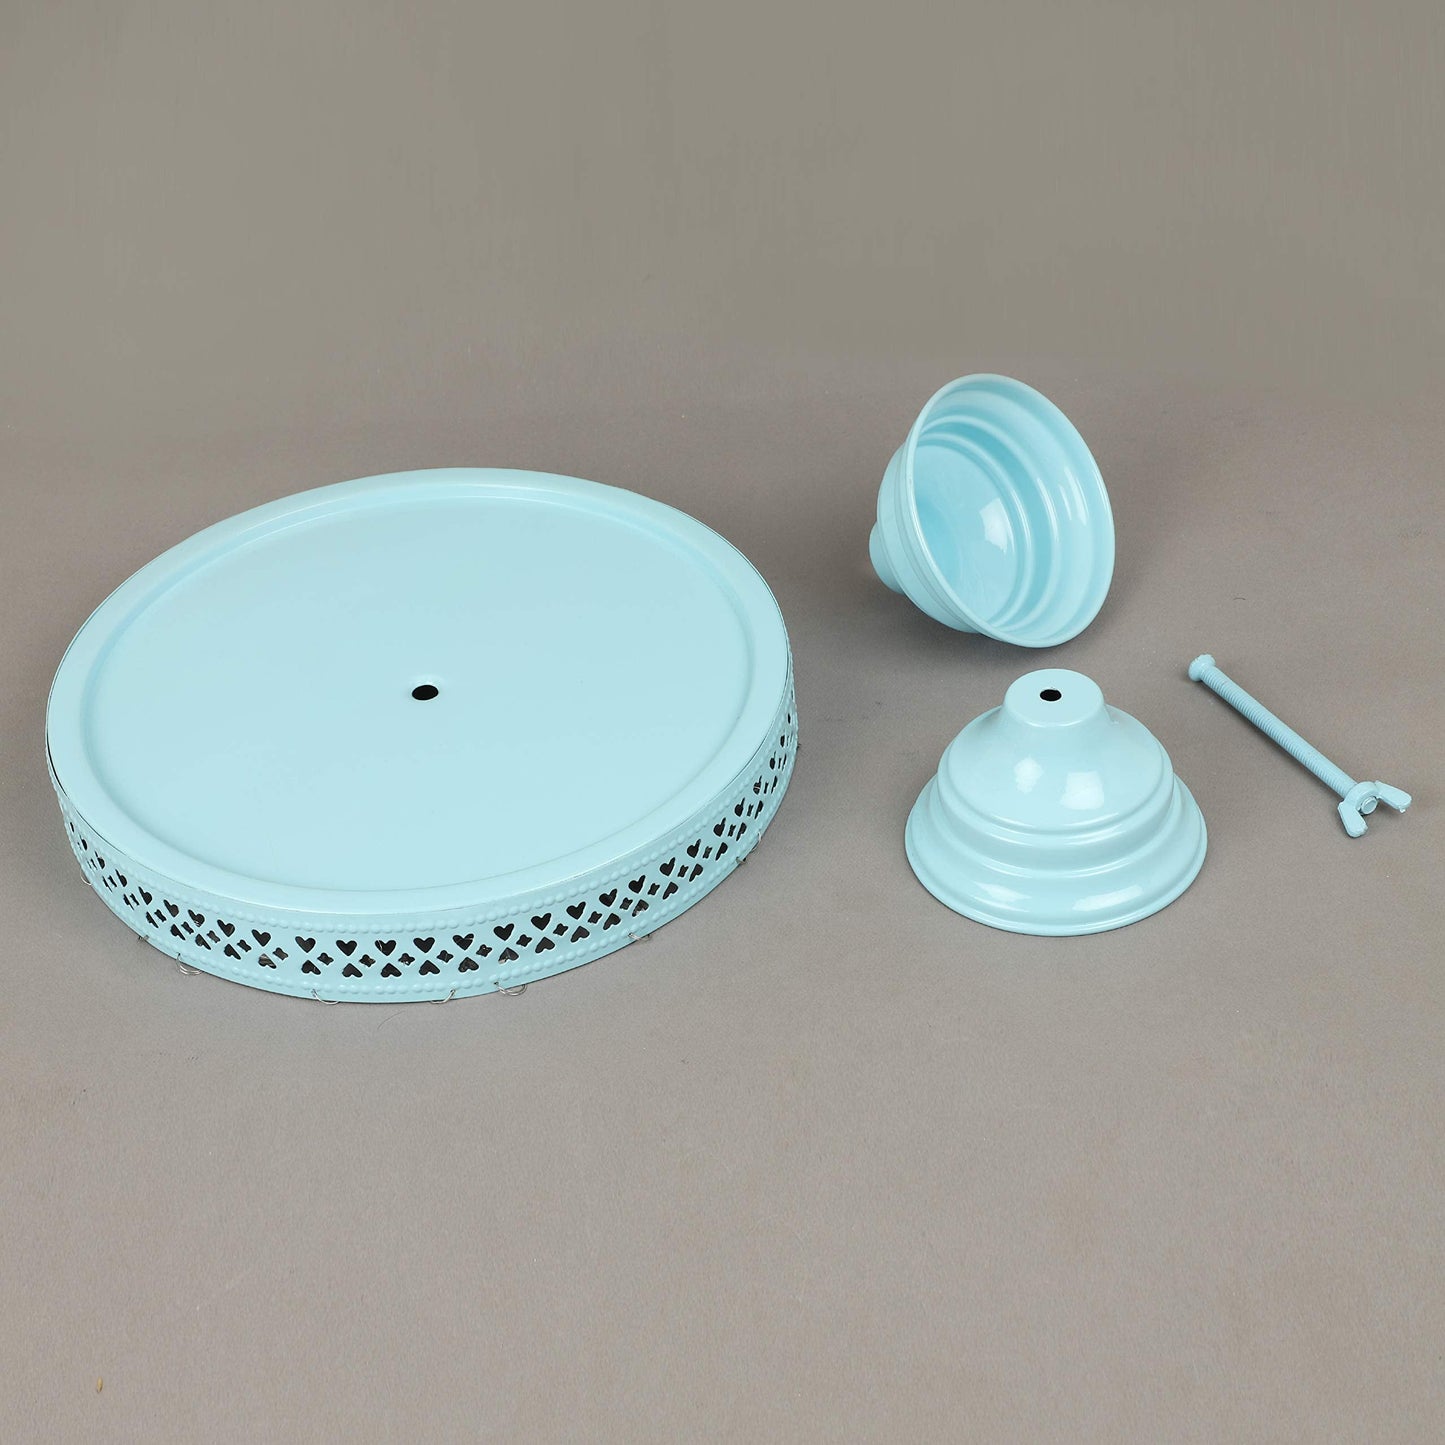 GiftBay Creations Cake Stand Pedestal 11" Diameter (Top), Strong Metal with Clear Hanging Crystals (Sky Blue)